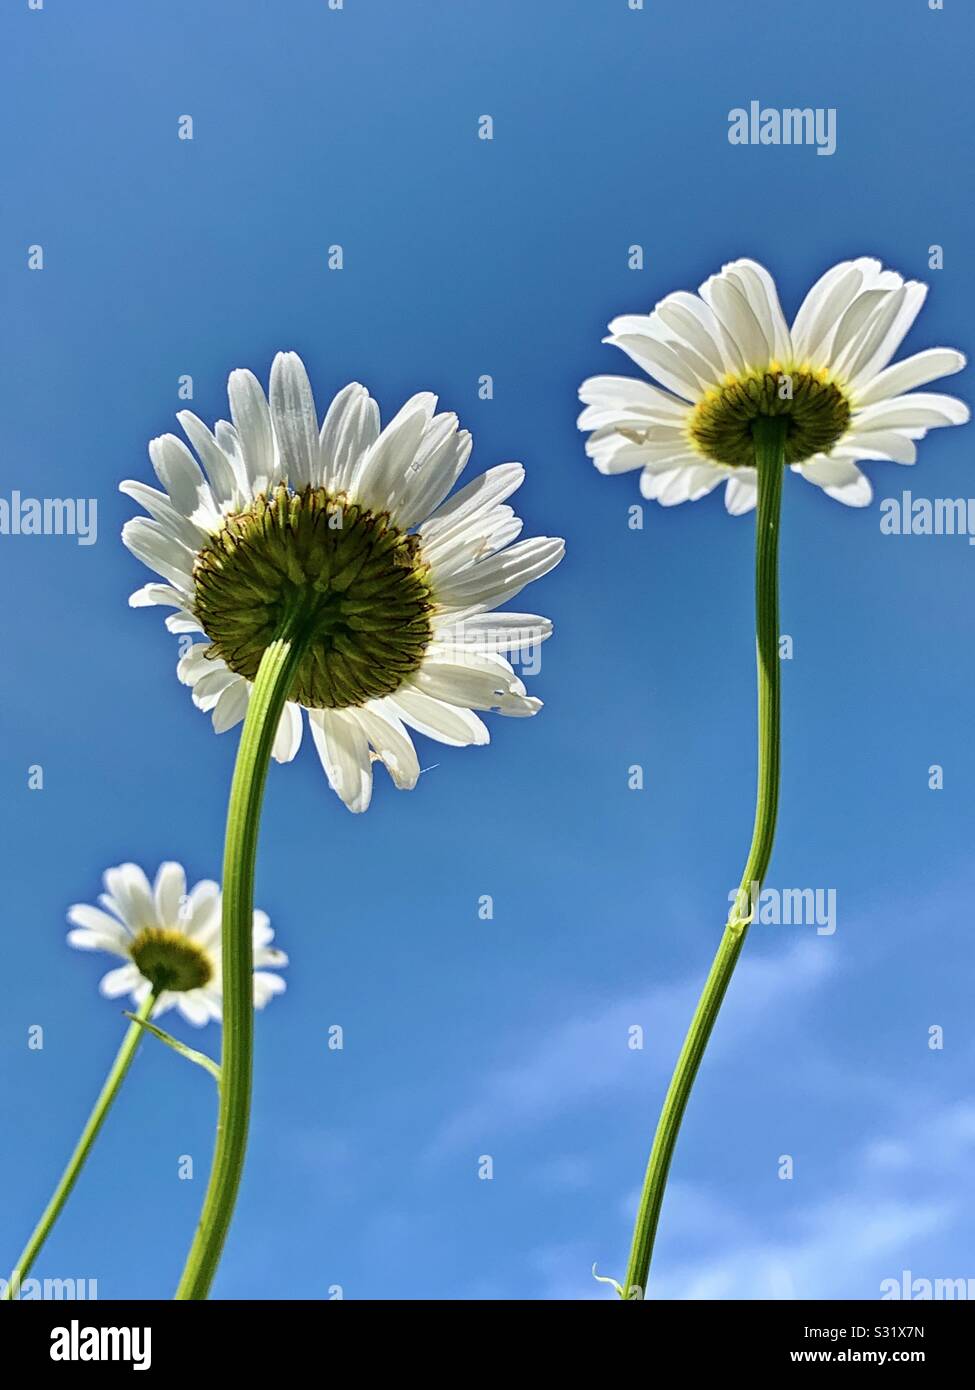 Daisies reaching for the sun Stock Photo